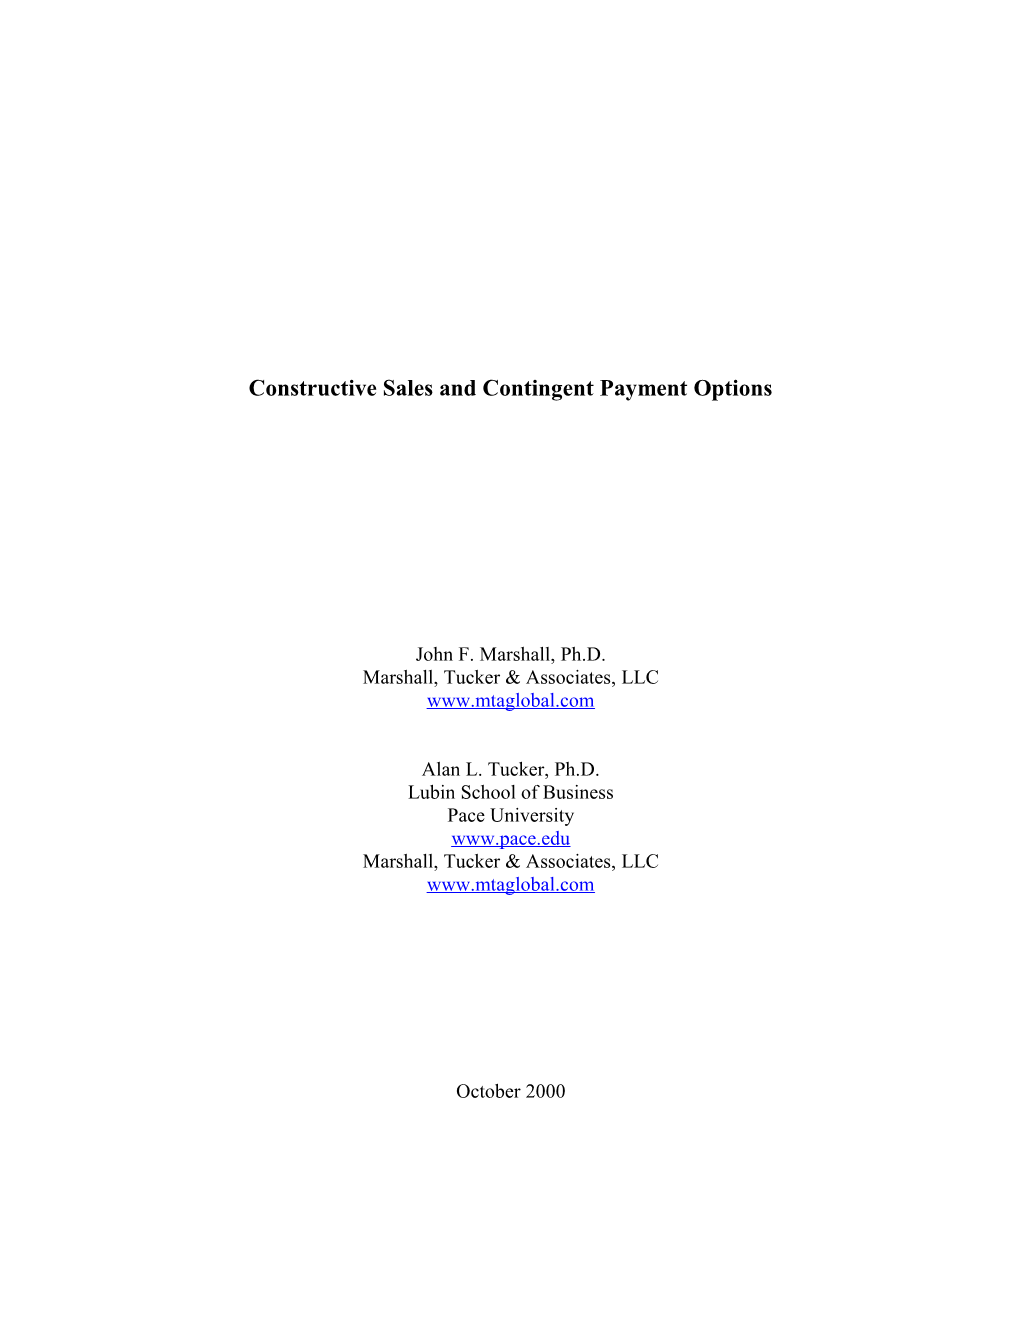 Constructive Sales and Contingent Payment Options